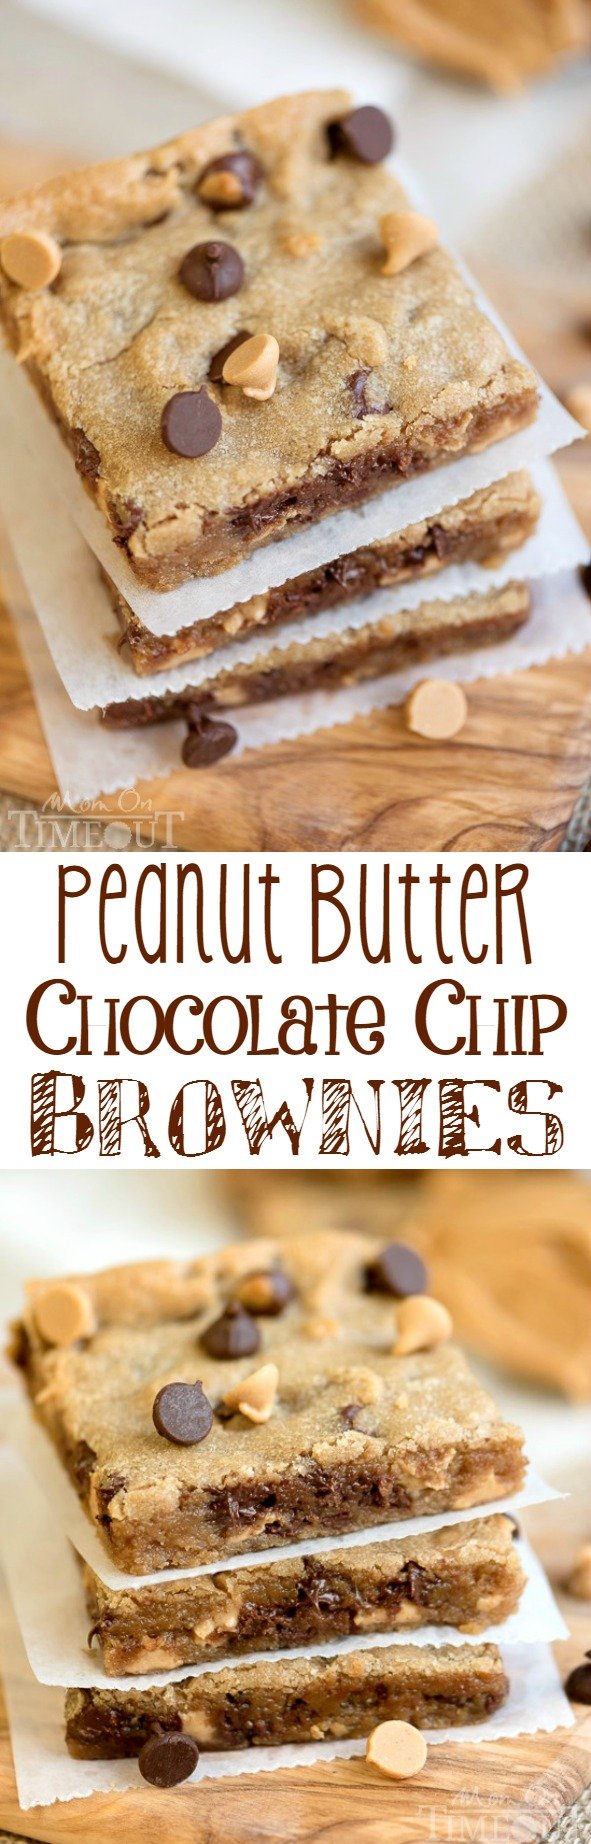 Perfectly moist, decadent, and fudgy, these sinful Peanut Butter Chocolate Chip Brownies will redefine your love for peanut butter. The perfect easy dessert recipe for peanut butter and chocolate lovers!| MomOnTimeout.com